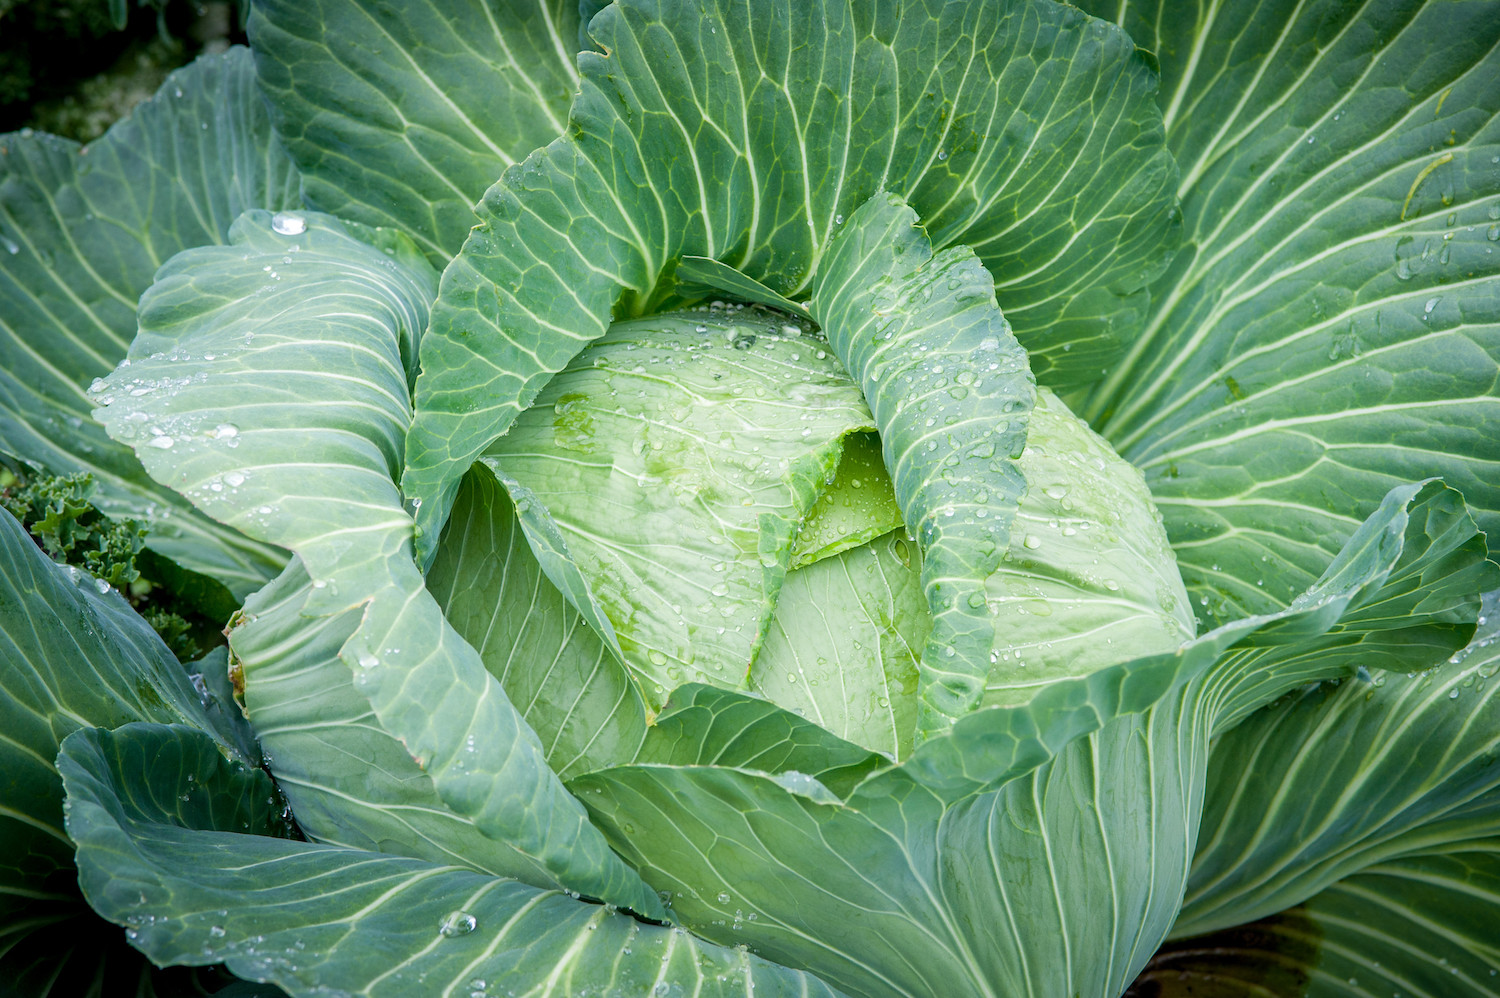 A cabbage with drops of water on its surface fills the photo frame.